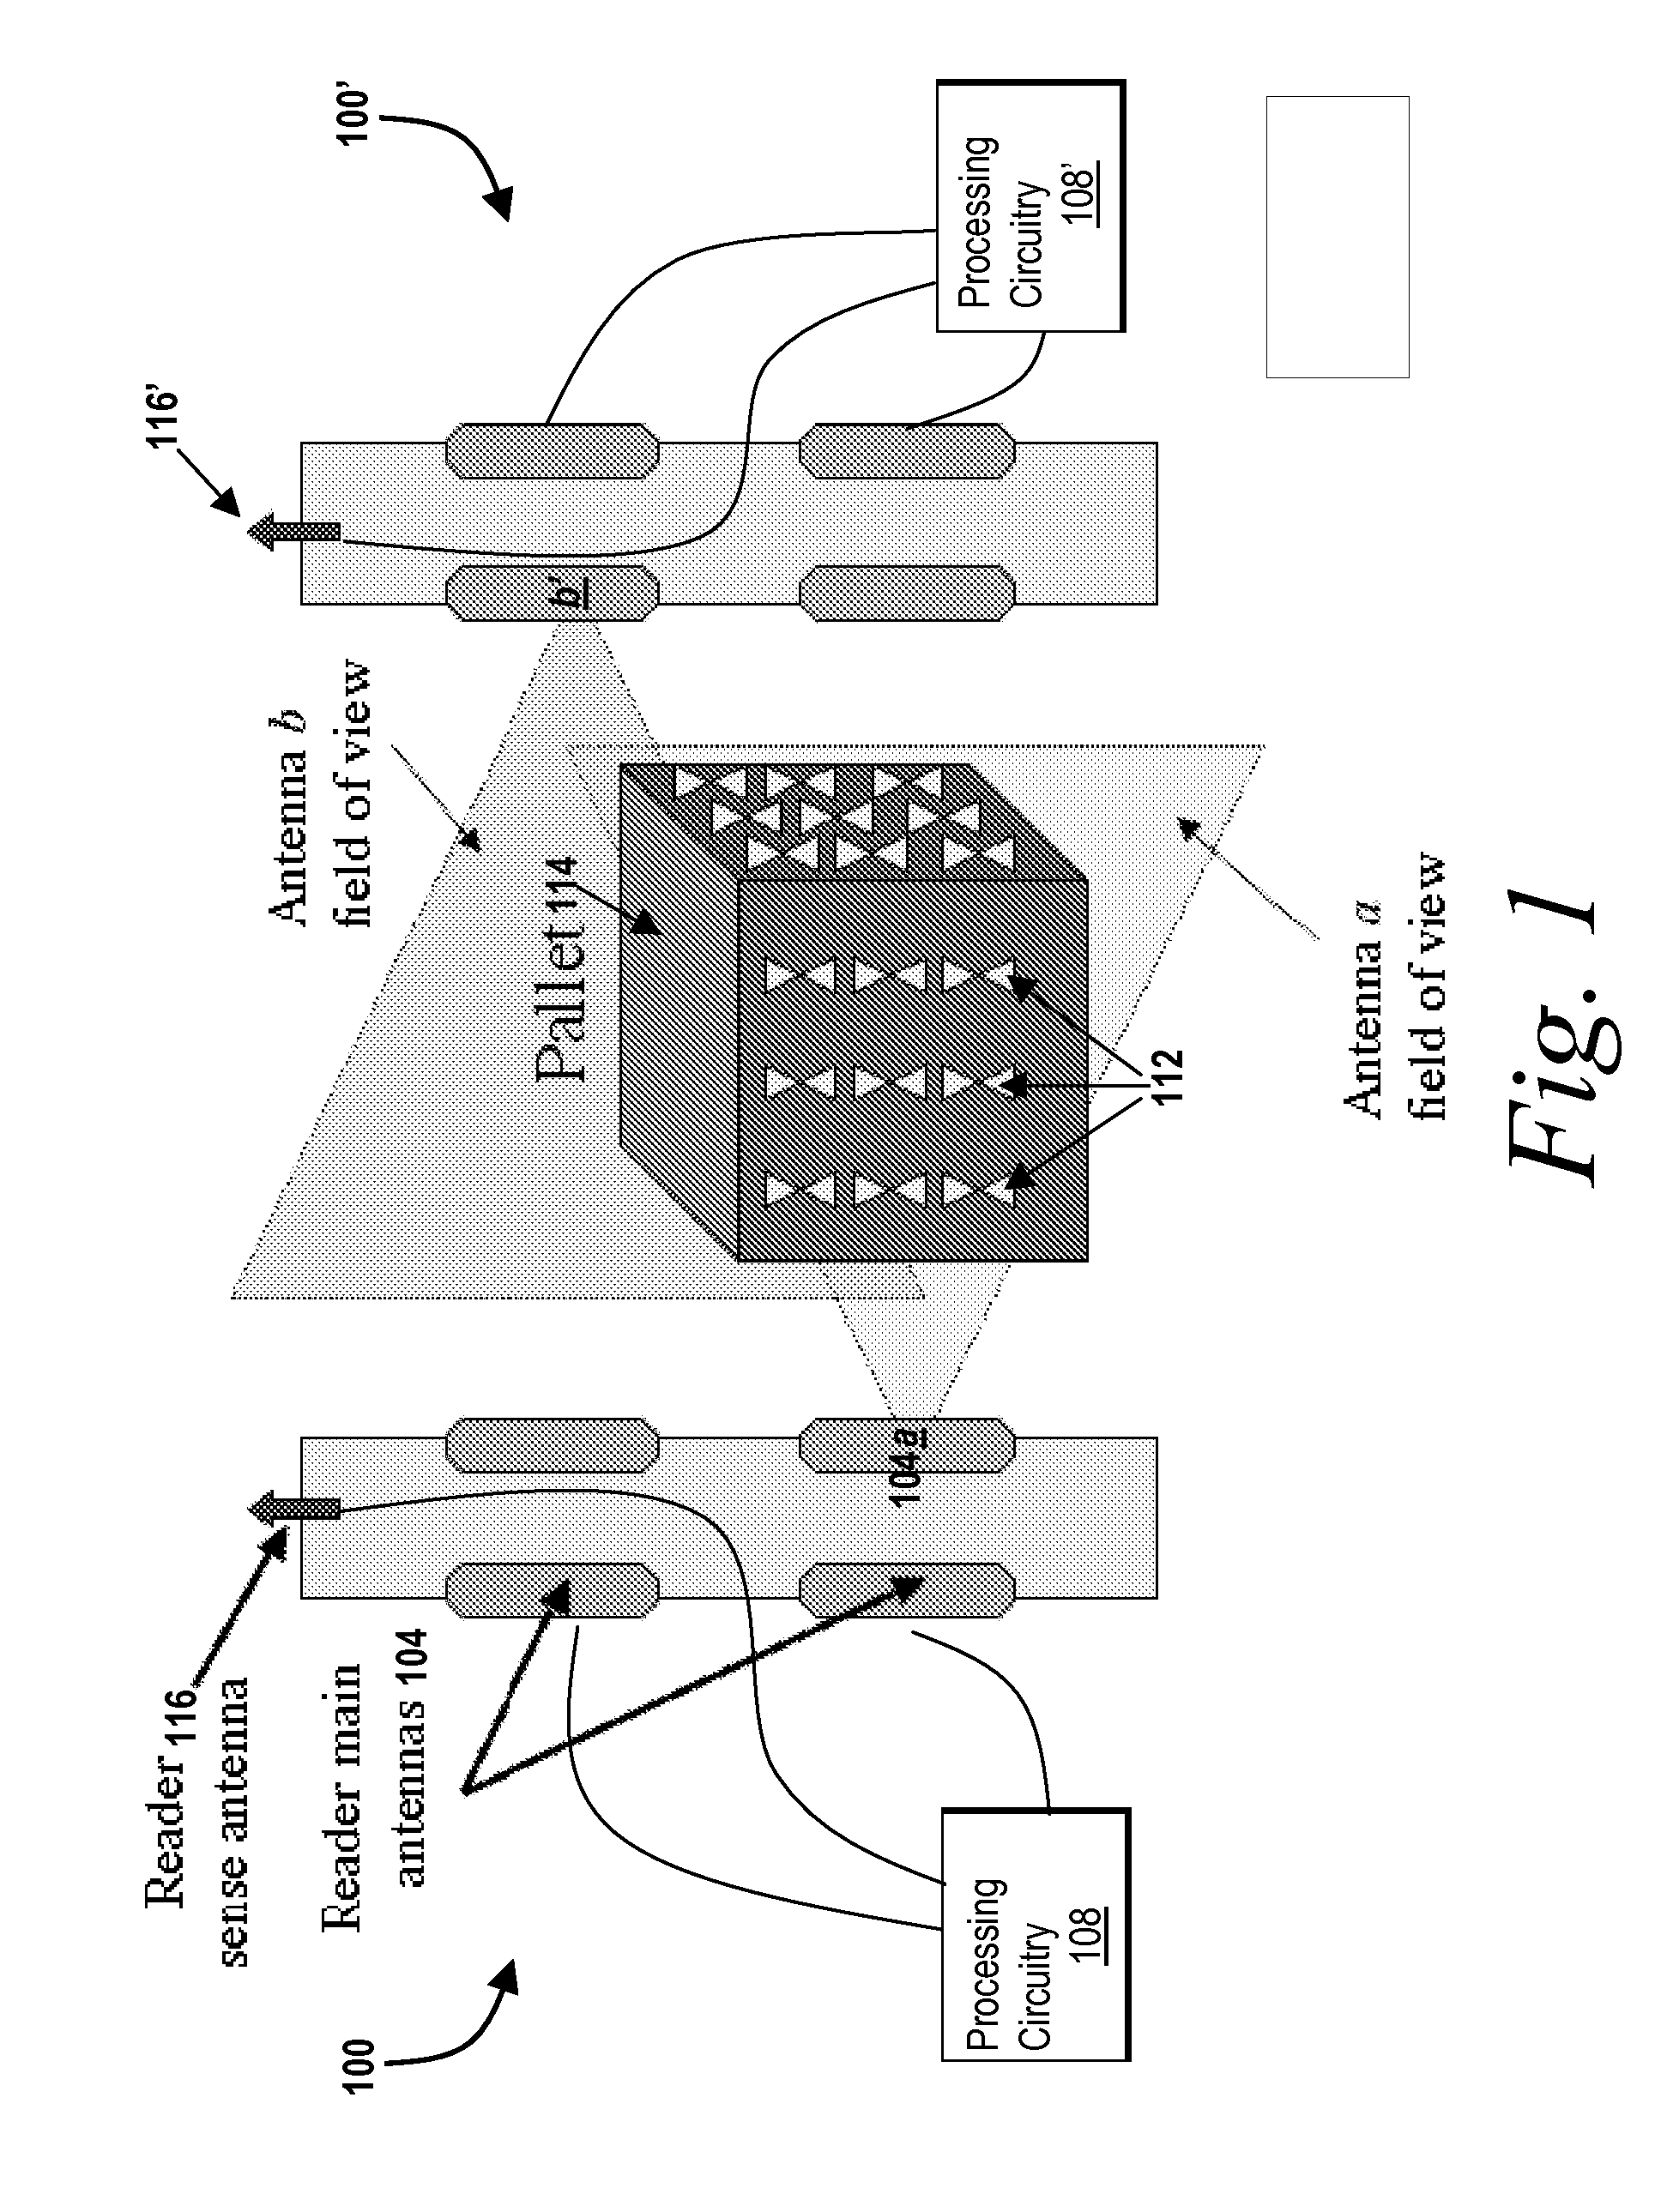 Systems and methods for active noise cancellation in an RFID tag reader